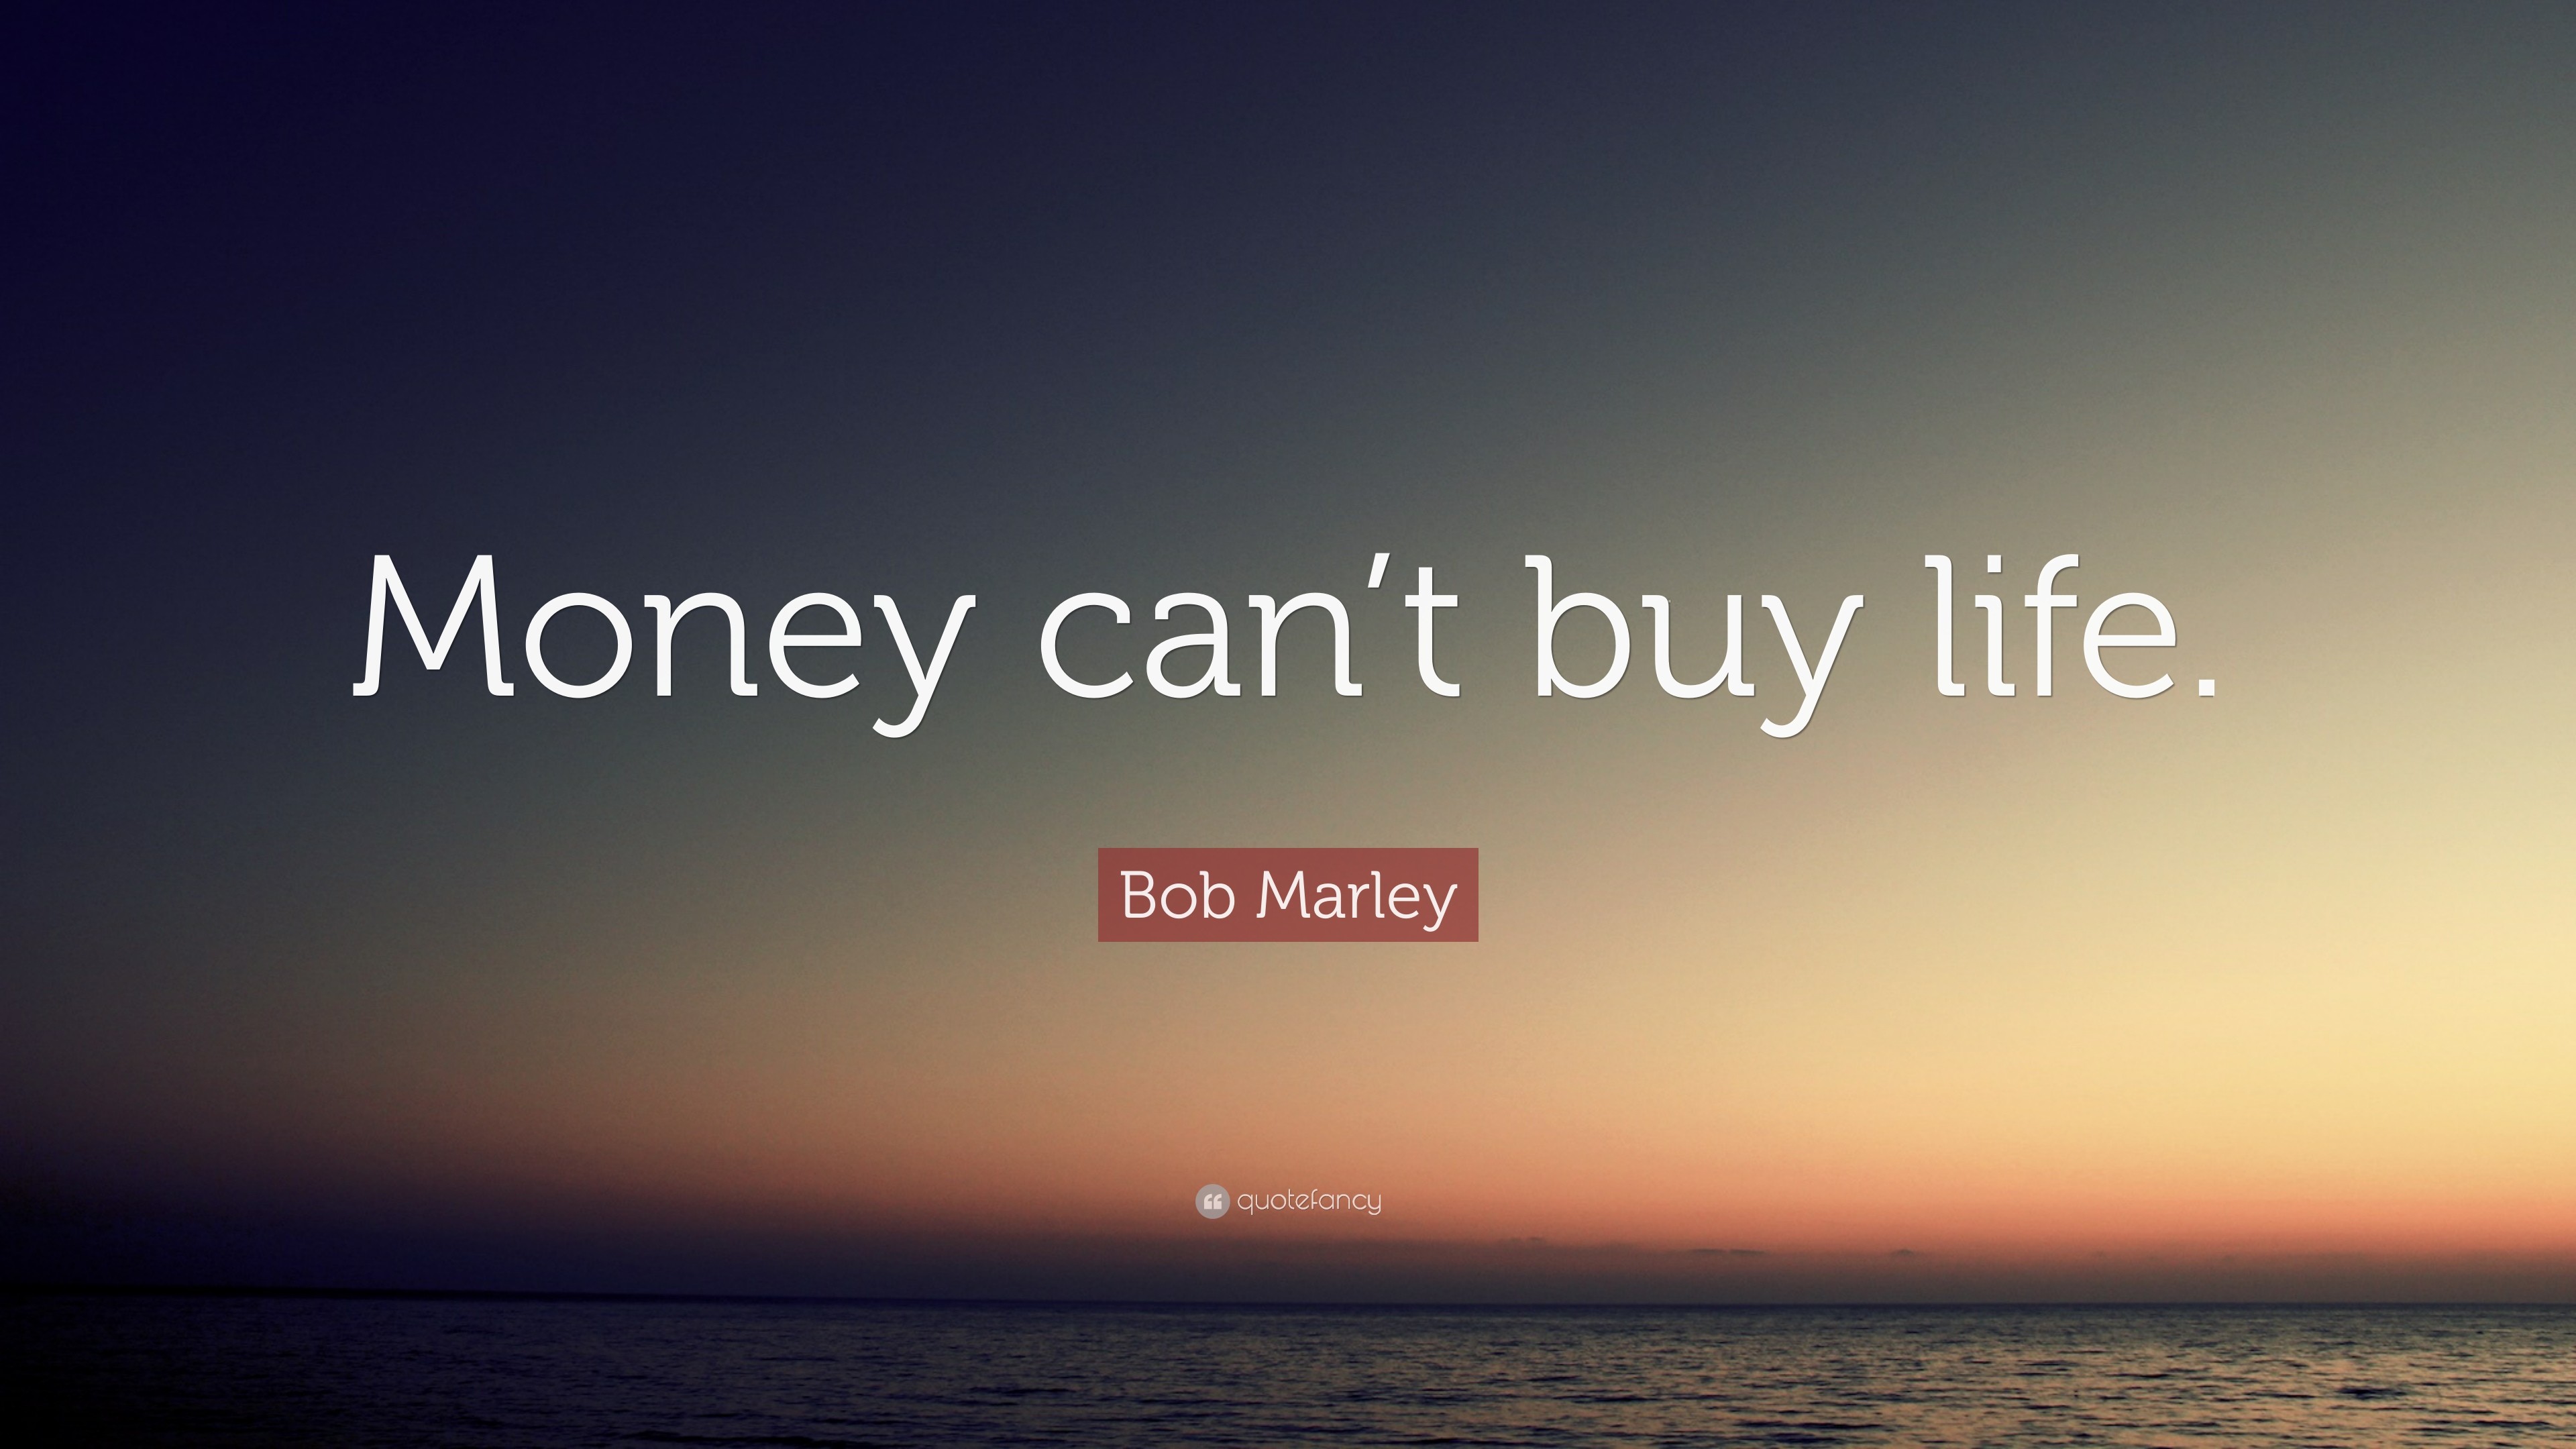 3840x2160 Bob Marley Quote: “Money can't buy life.”